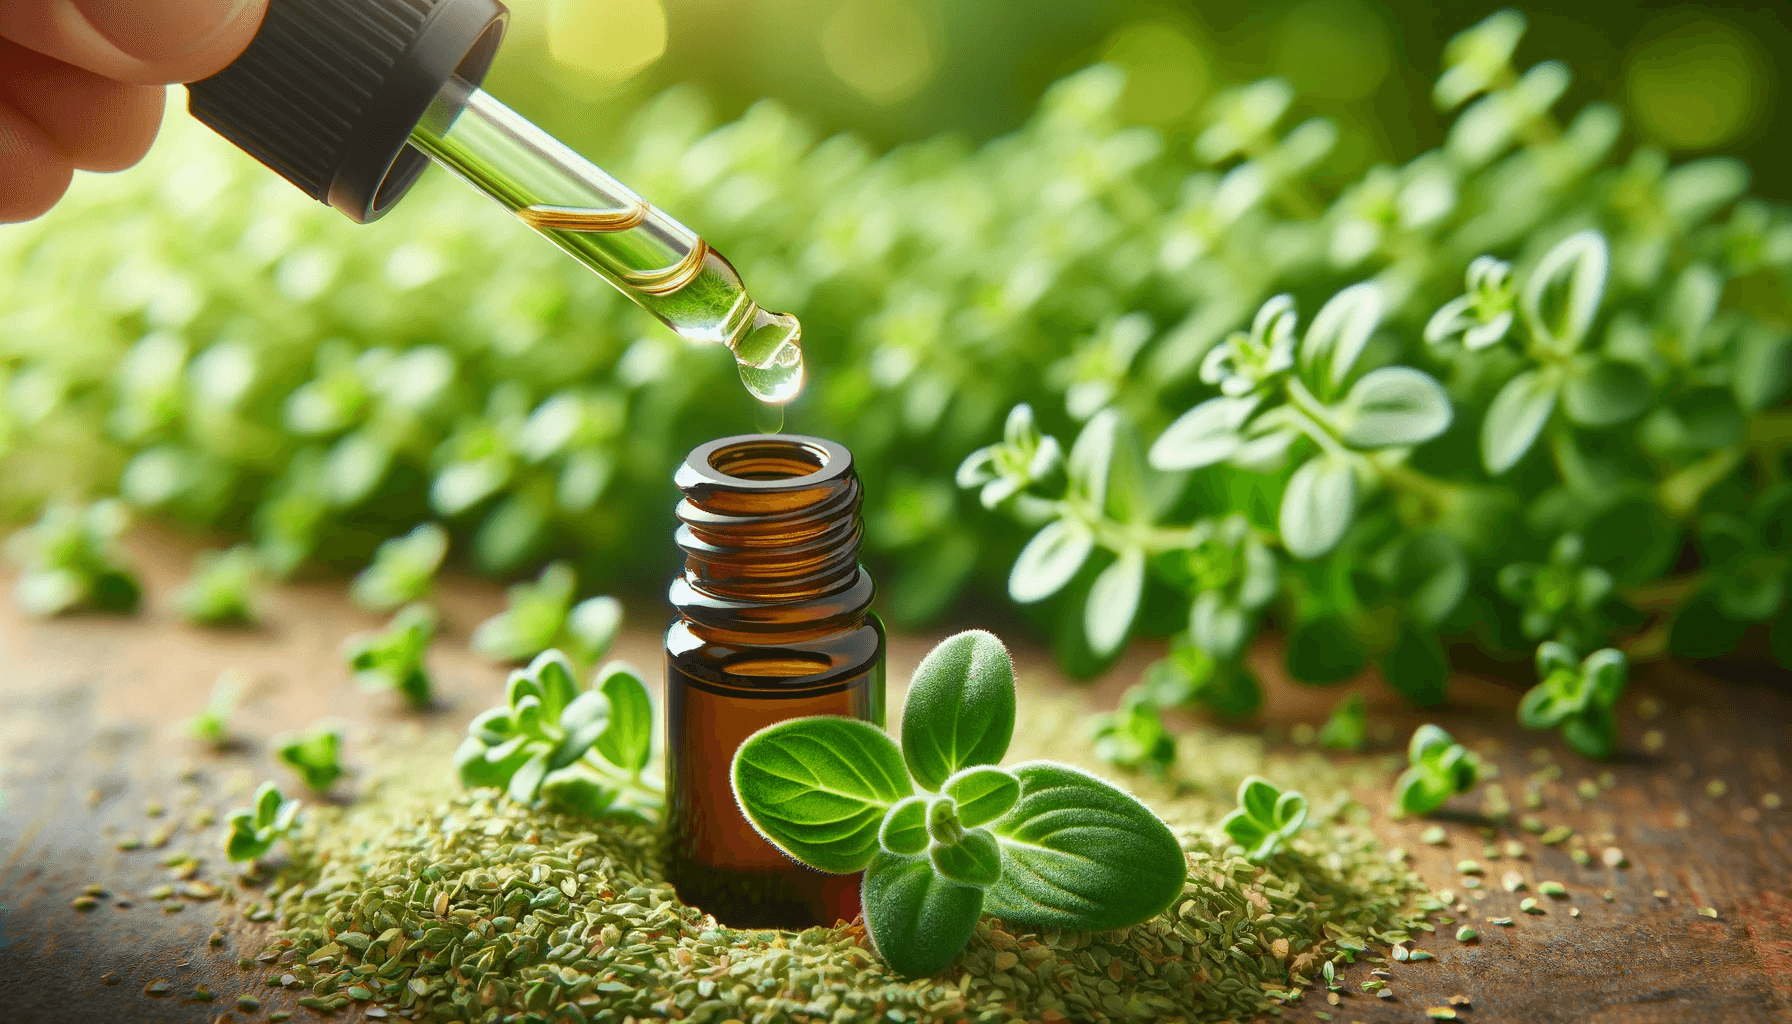 Oregano oil bottle with a vibrant green oregano plant in the background, emphasizing the pure extraction of the oil from the herb.